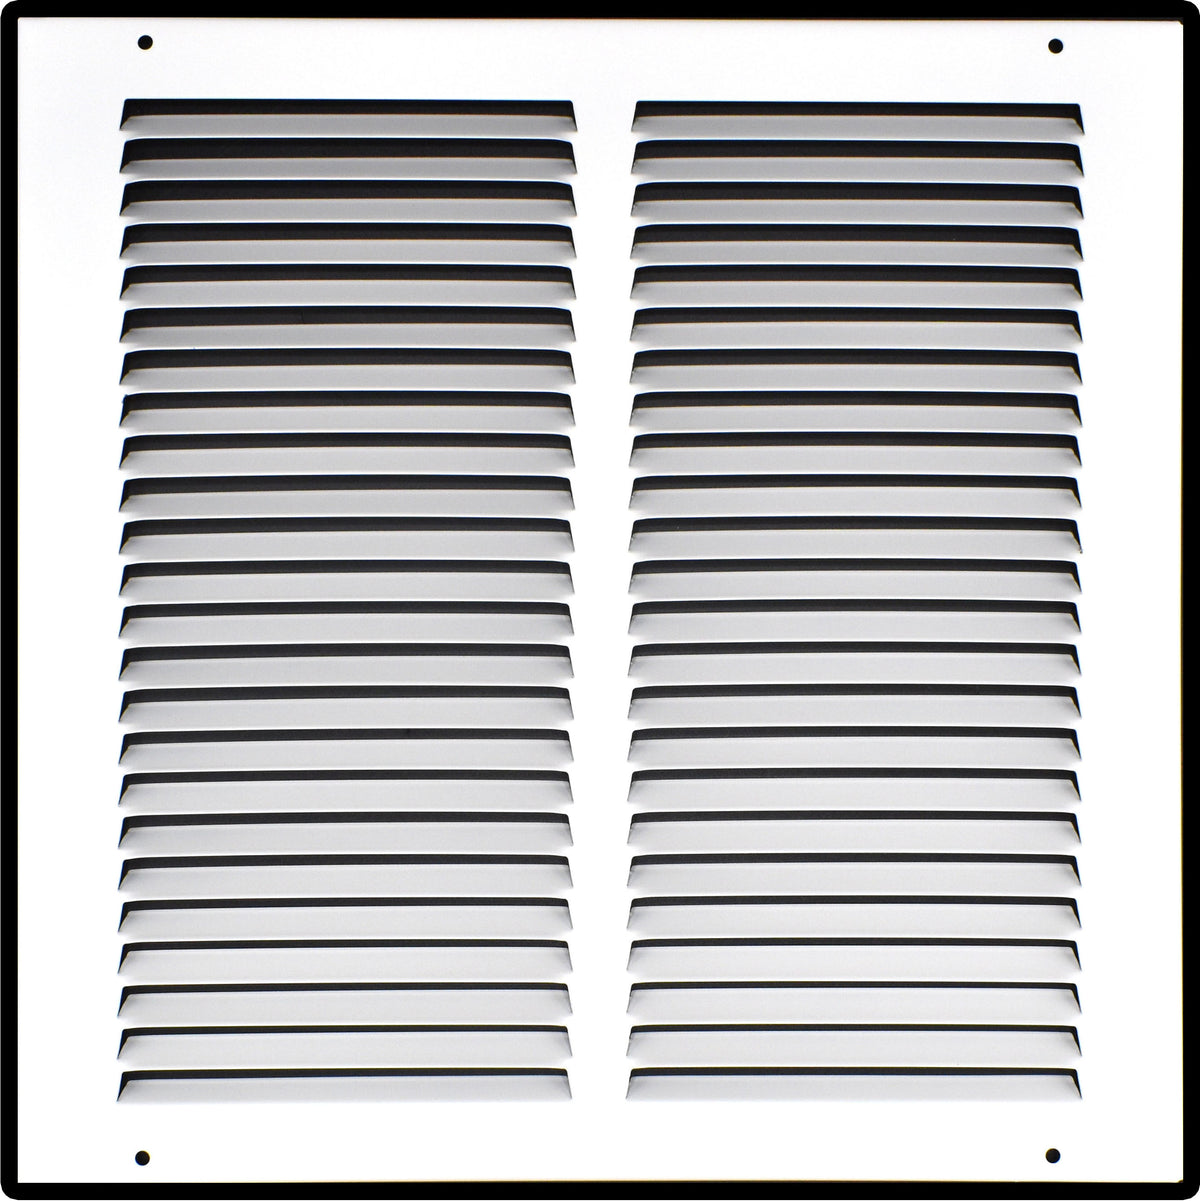 airgrilles 12" x 12" duct opening  -  hd steel return air grille for sidewall and ceiling 7hnd-flt-rg-wh-12x12 038775640503 - 1